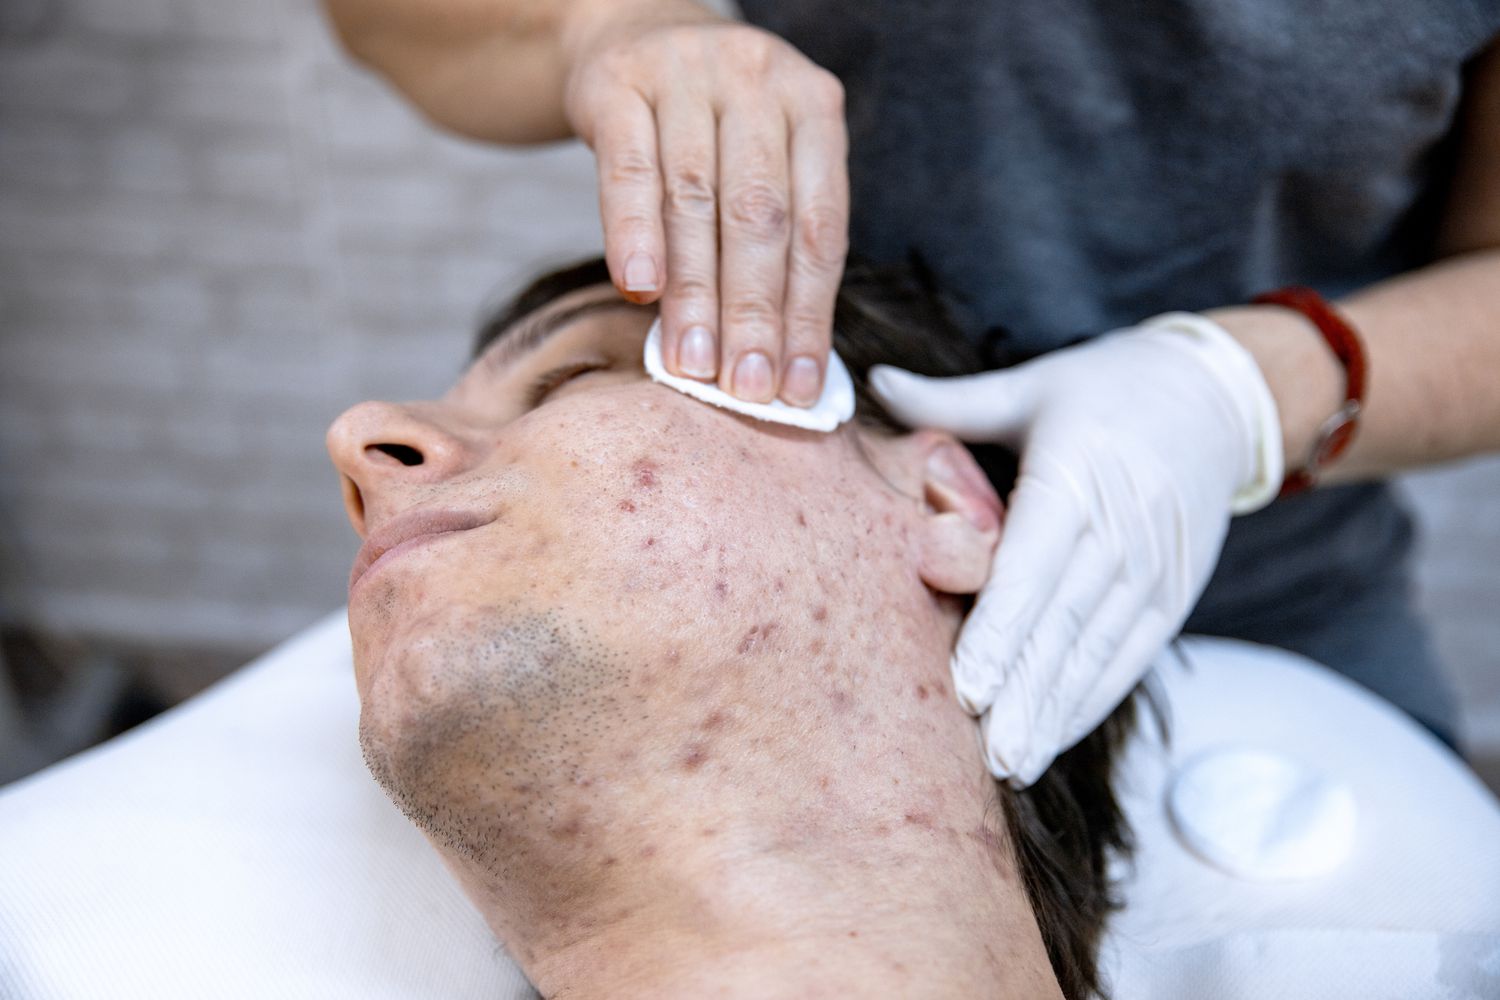 Acne Treatment - Discovering The Best Acne Treatment Options